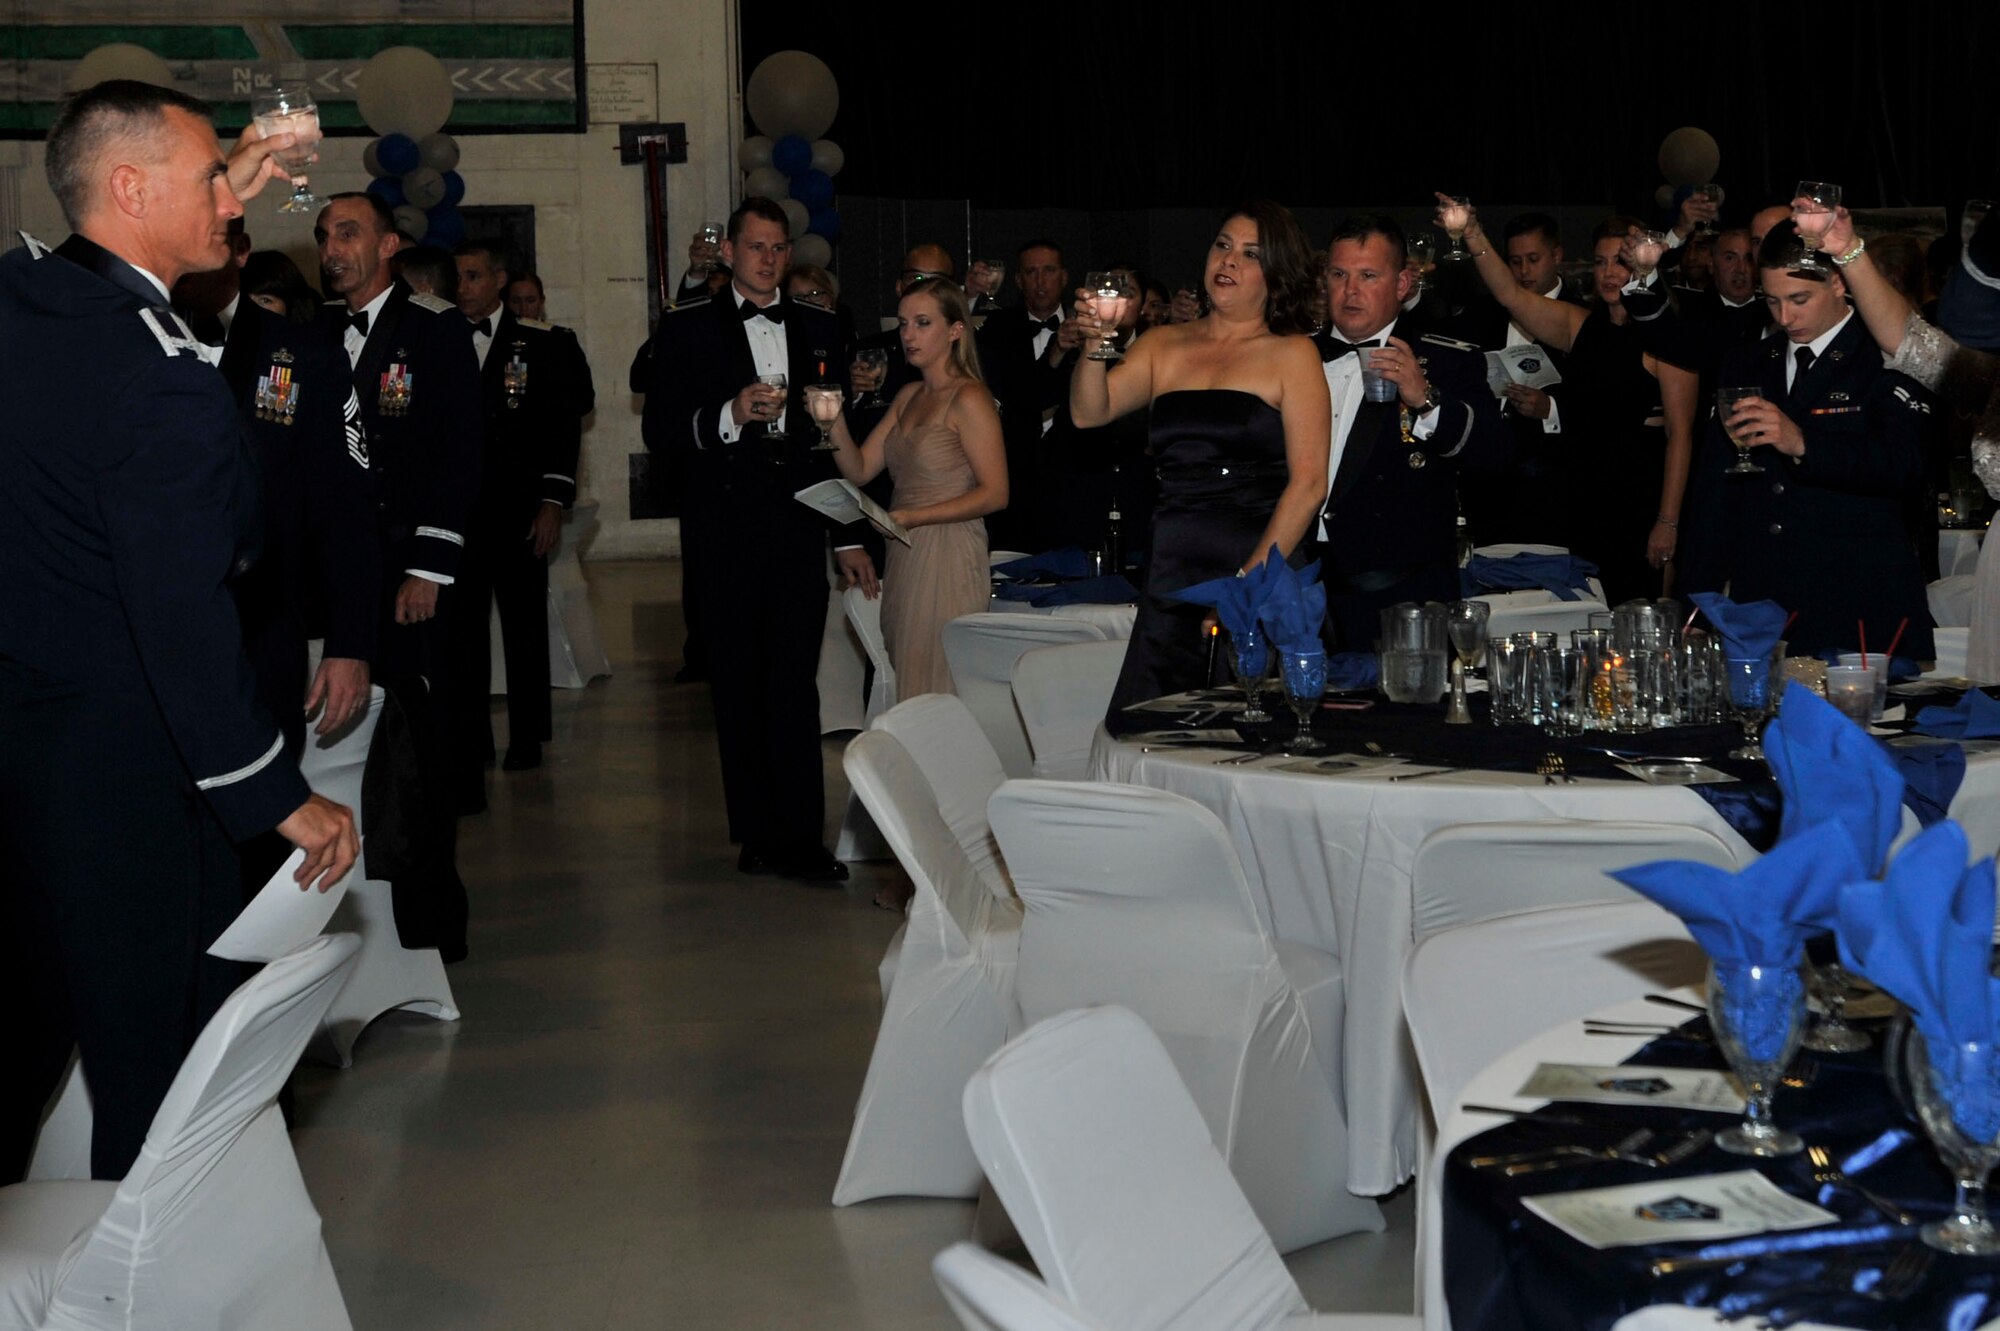 More than 300 military members, spouses and community members attended the event.